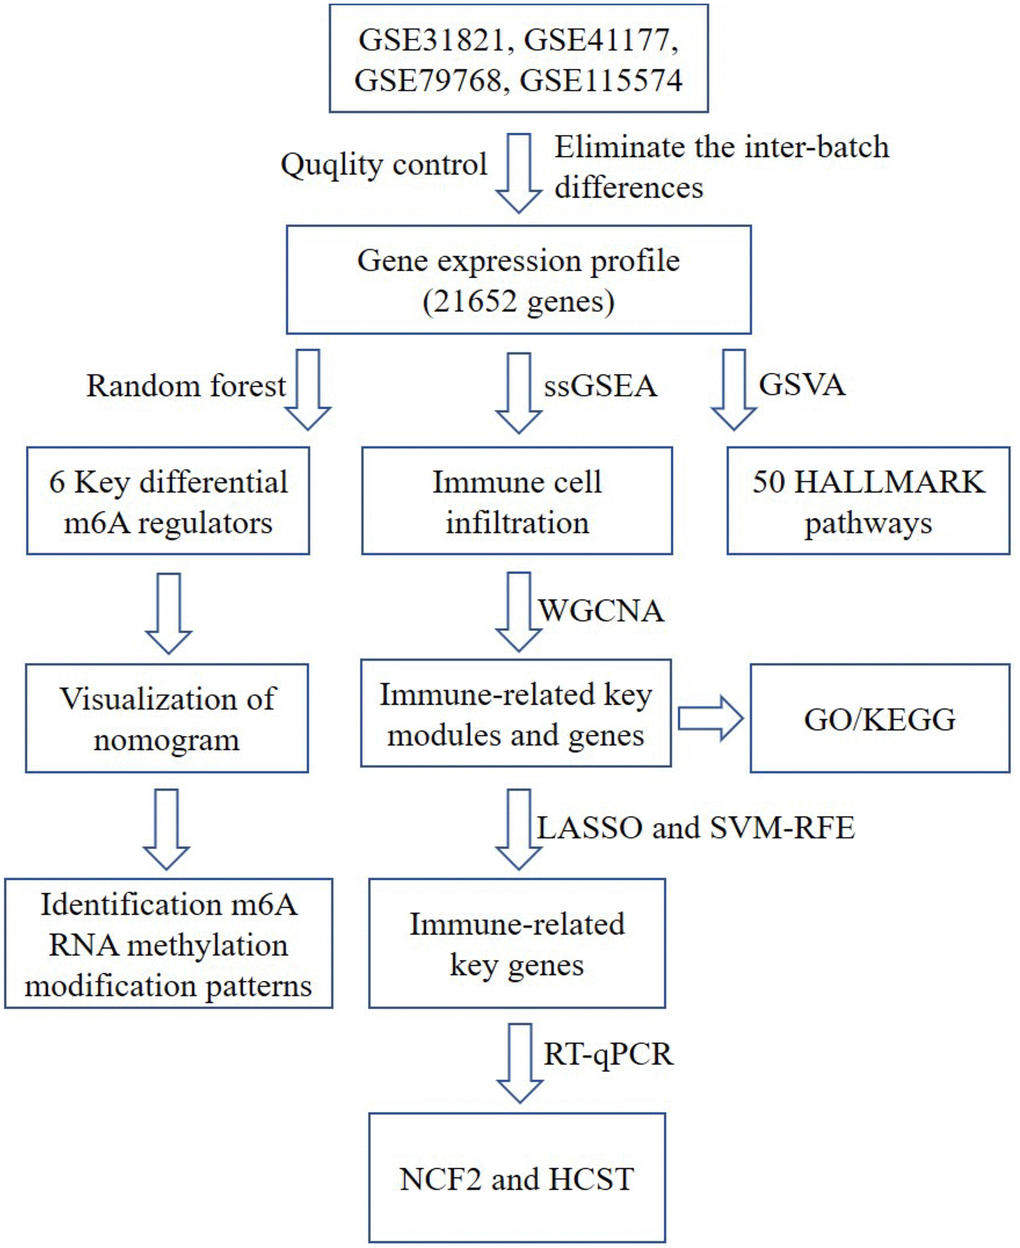 A flow chart of the analysis. ssGSEA, single-sample gene set enrichment analysis; GO, gene ontology annotation; KEGG, kyoto encyclopedia of genes and genomes pathway enrichment analyses; GSVA, gene set variation analysis; WGCNA, weighted gene co-expression network analysis; LASSO, Least Absolute Shrinkage and Selector Operation; SVM-RFE, Support Vector Machine-Recursive Feature Elimination; NCF2, neutrophil cytosolic factor 2; HCST: hematopoietic cell signal transducer.